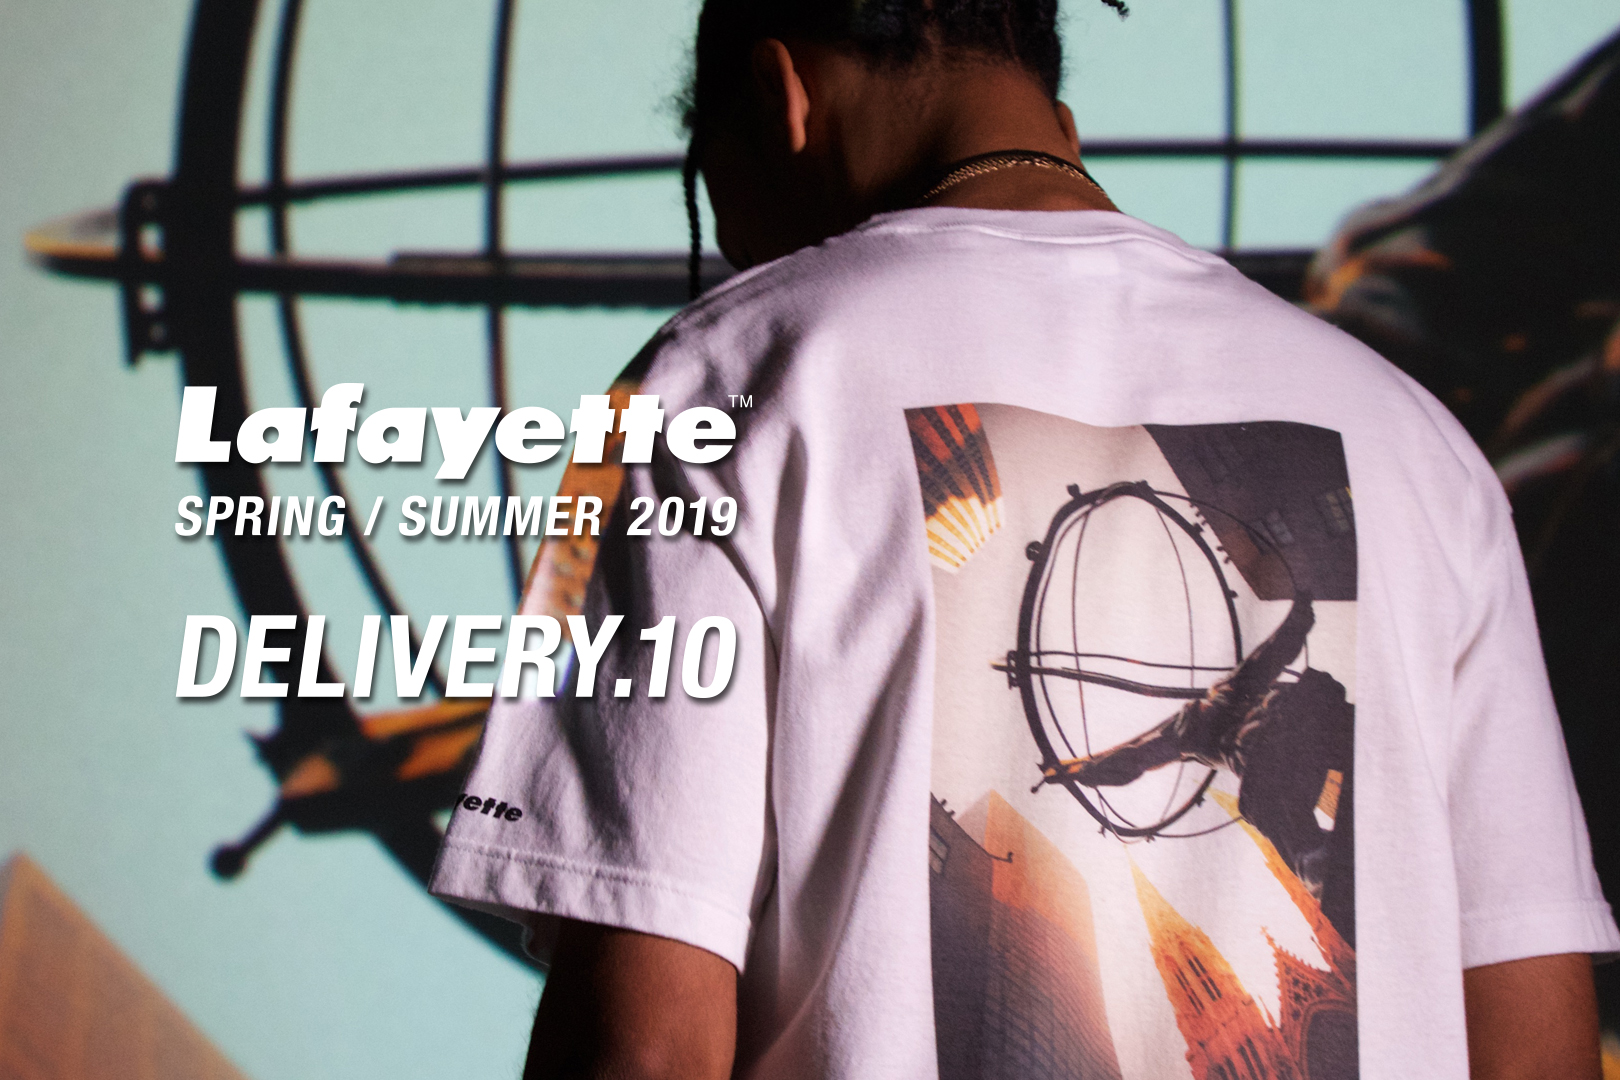 Lafayette 2019 Spring/Summer Collection Delivery.10